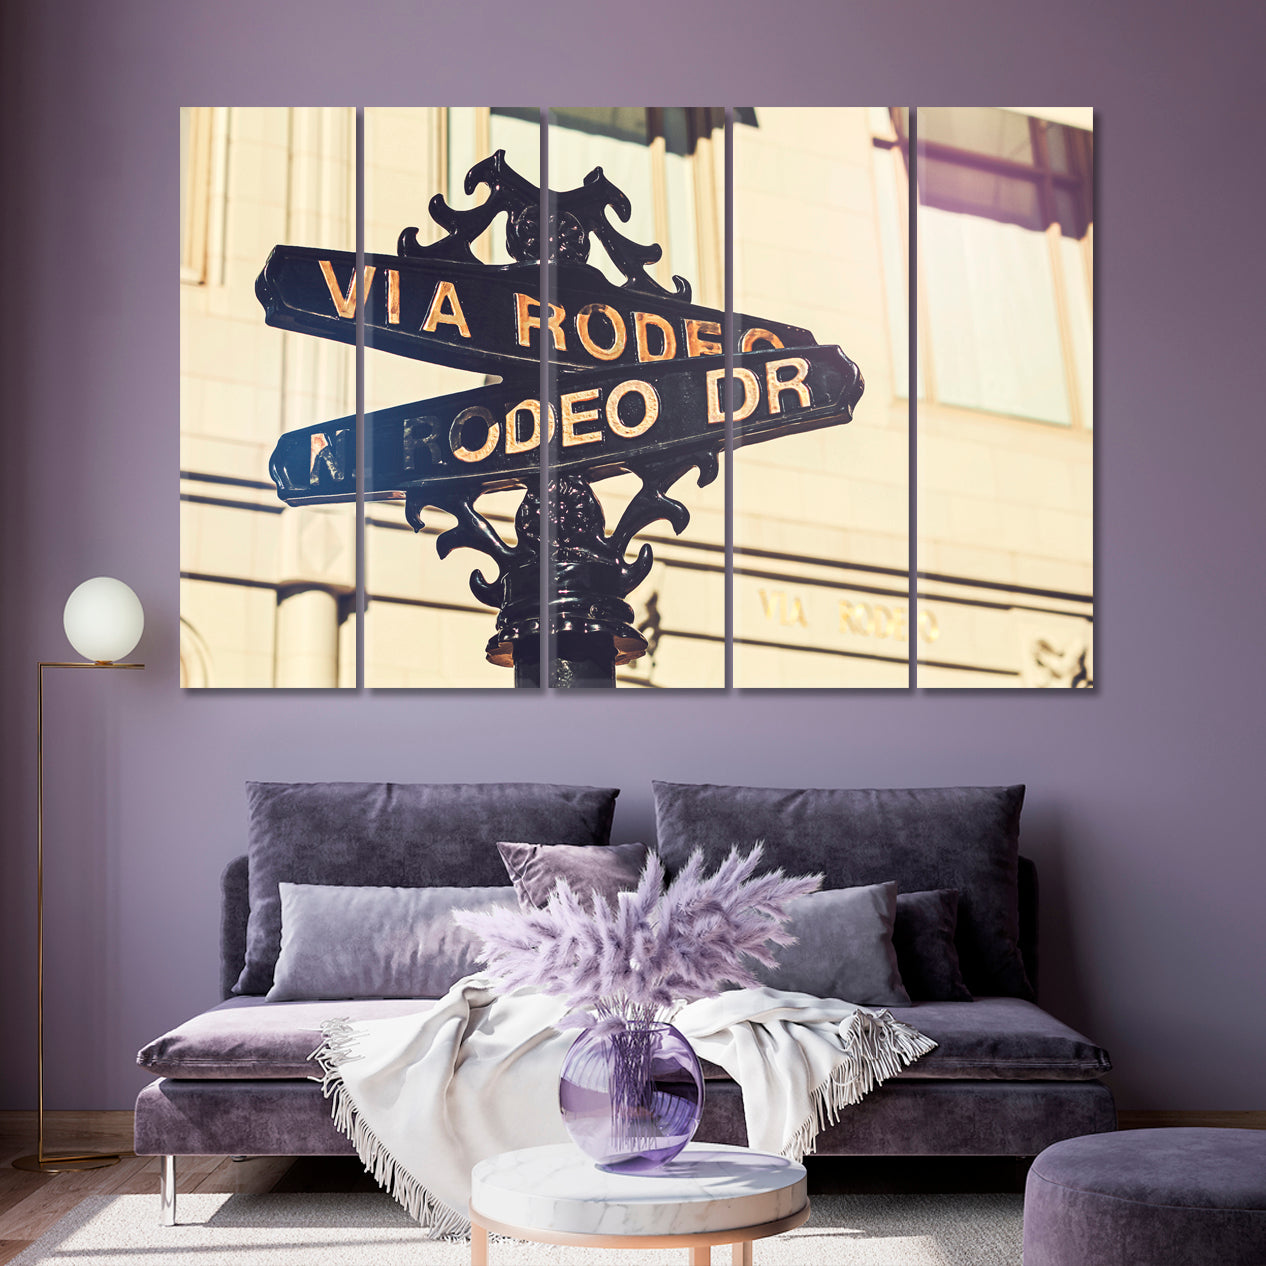 Famous Beverly Hills California United States Rodeo Drive Sign Cities Wall Art Artesty 5 panels 36" x 24" 